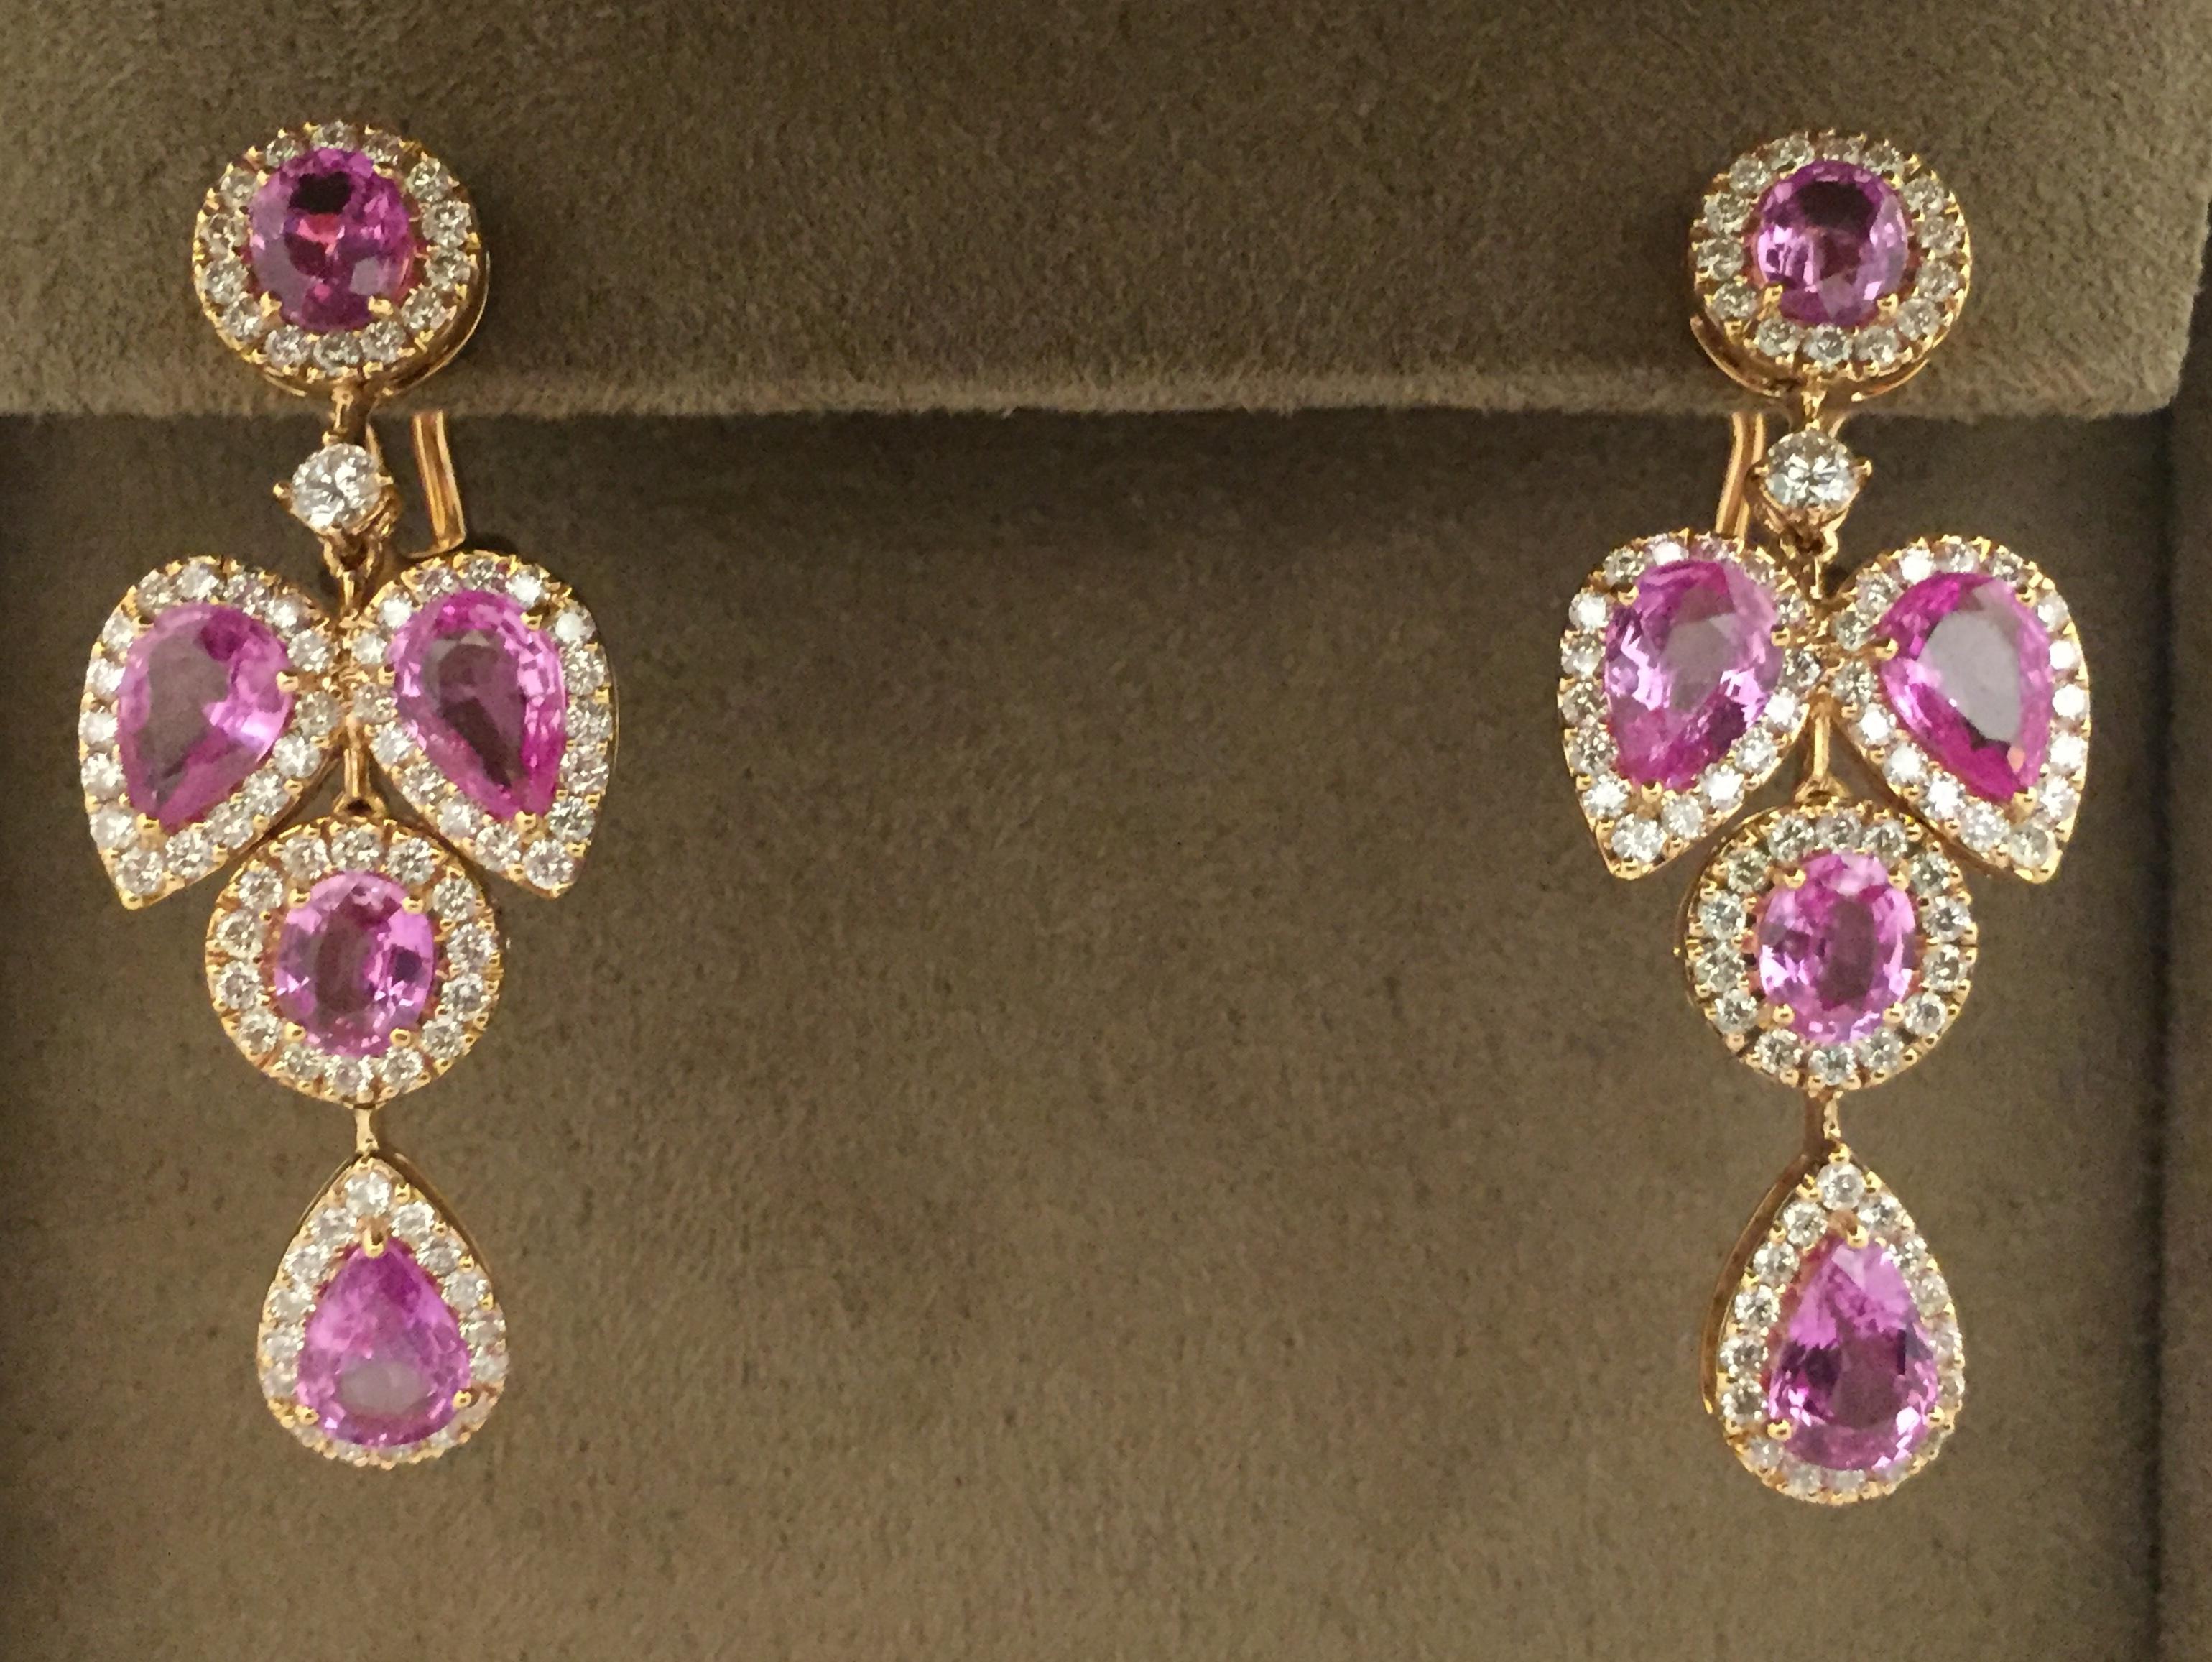 Contemporary Feminine Chandelier Rose Gold Earrings with Pink Sapphire and Diamonds